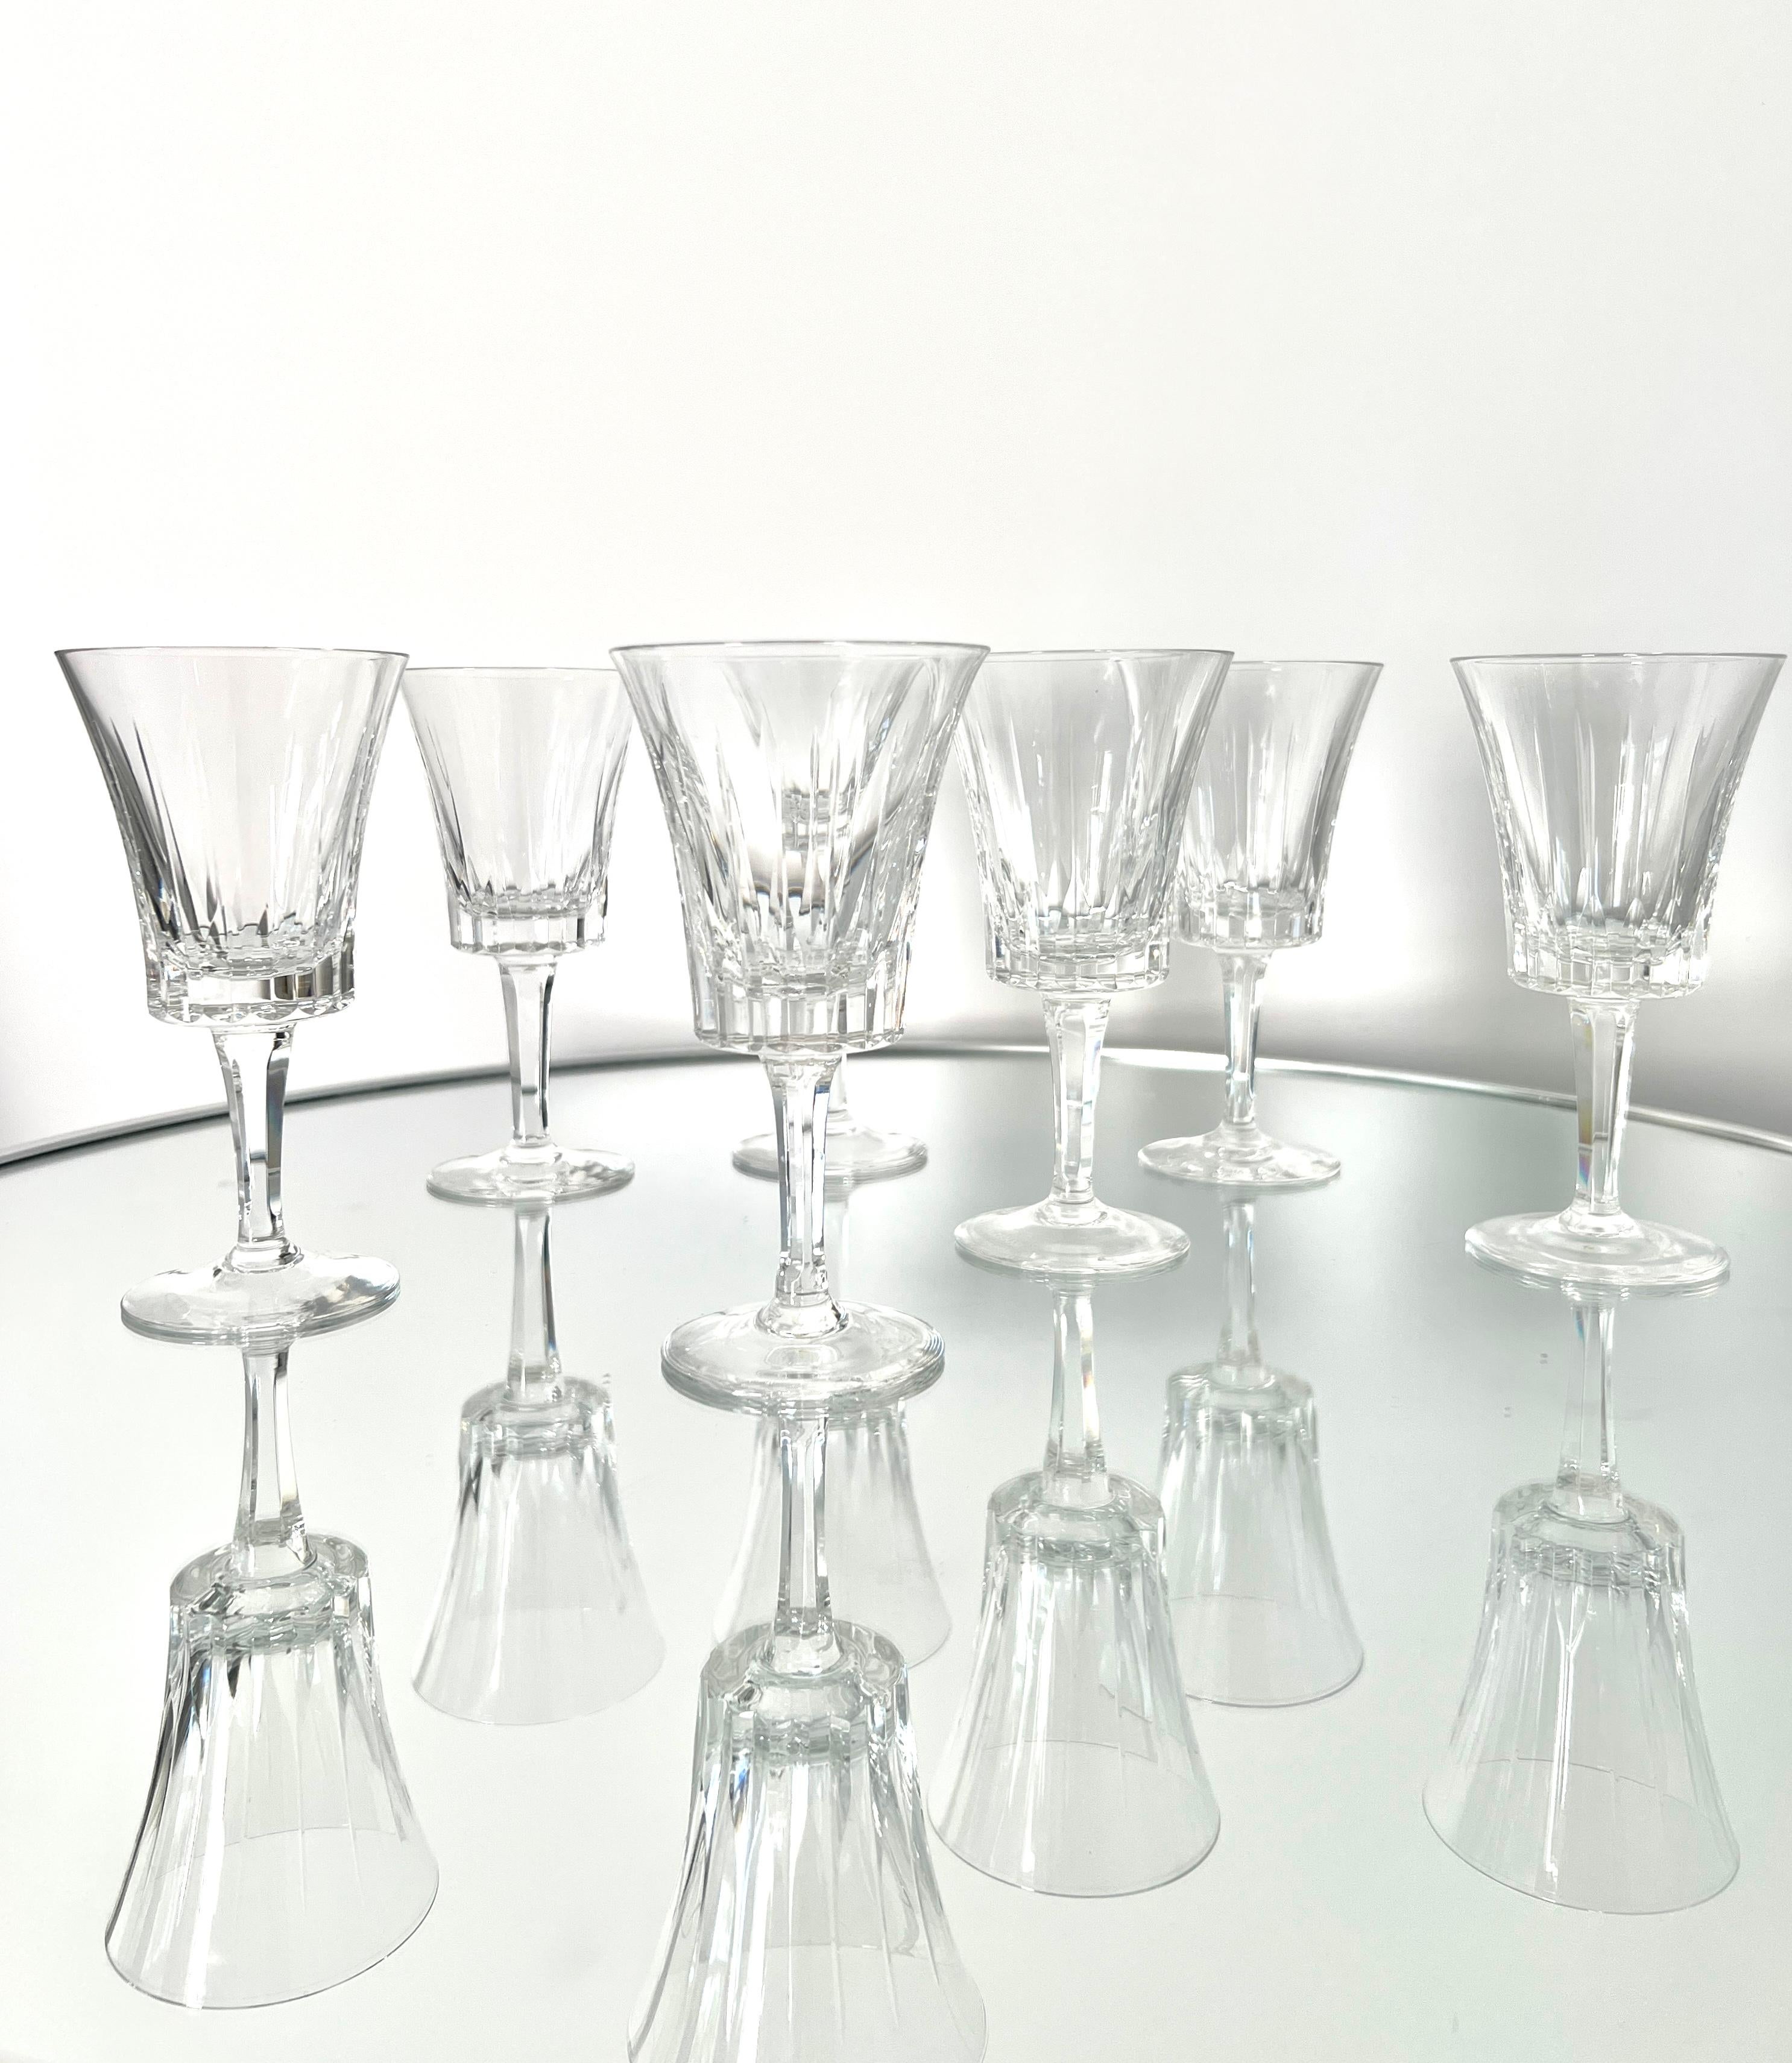 Set of Seven Vintage Crystal Wine Glasses by Gorham, c. 1970 In Good Condition For Sale In Fort Lauderdale, FL